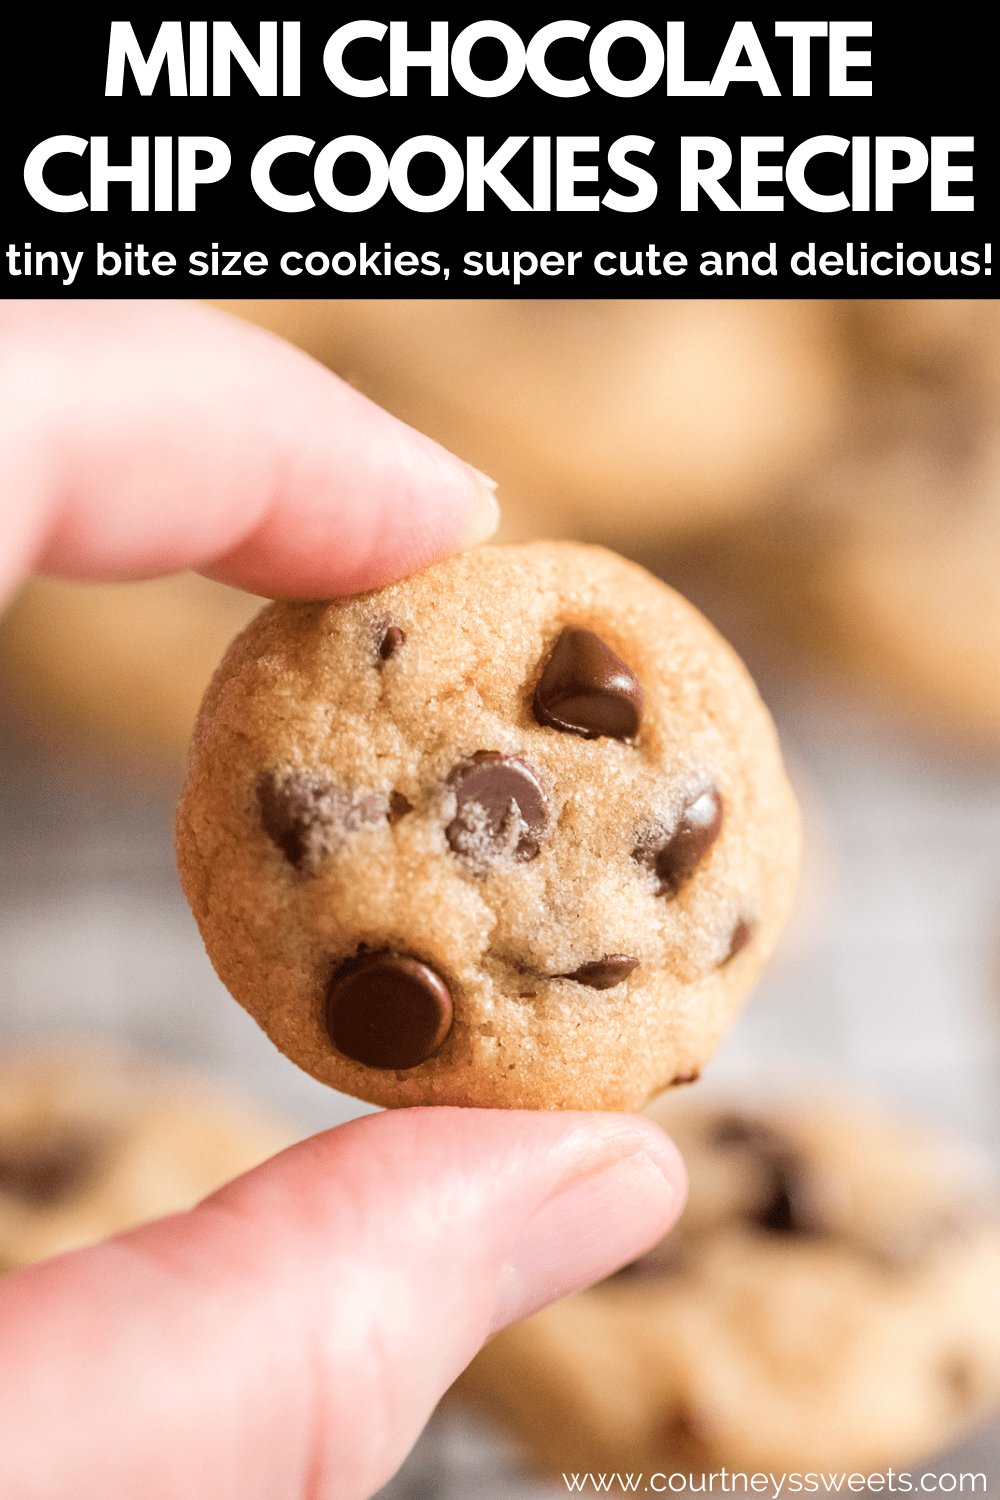 pointer and thumb finger holding a mini chocolate chip cookie with text on image pinterest pin.